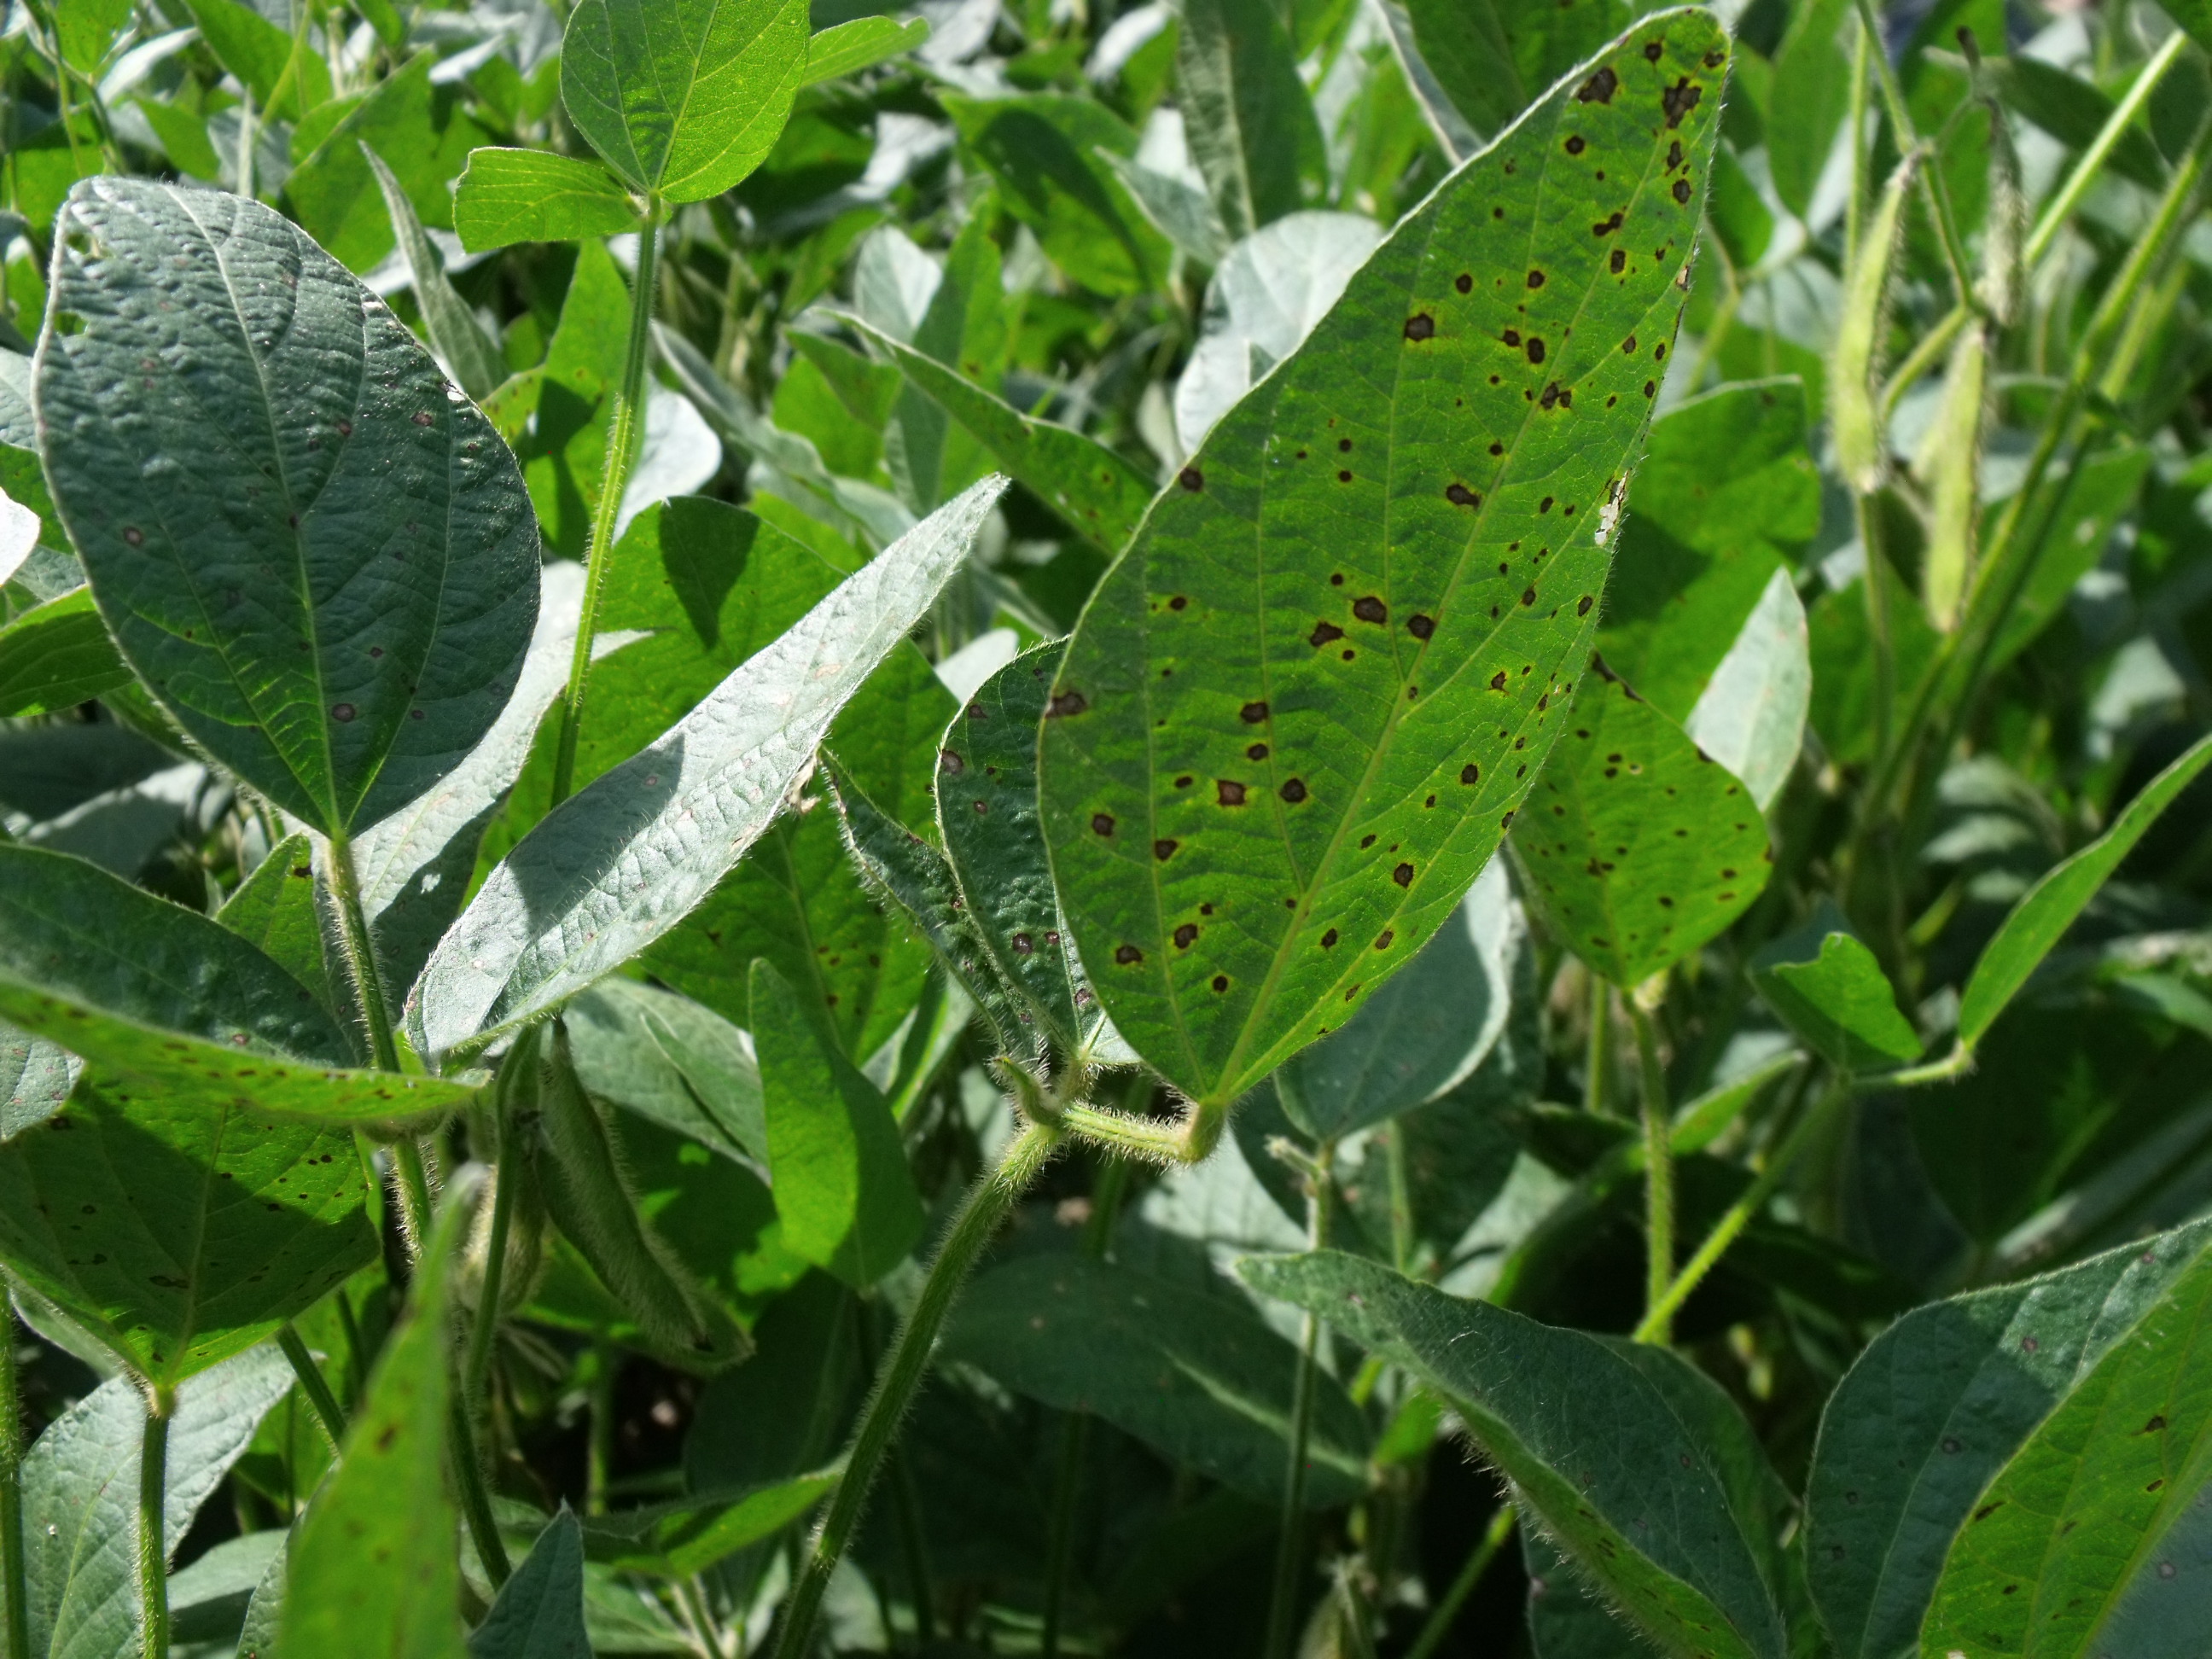 This agronomic photo shows frogeye leaf spot on soybean leaves.